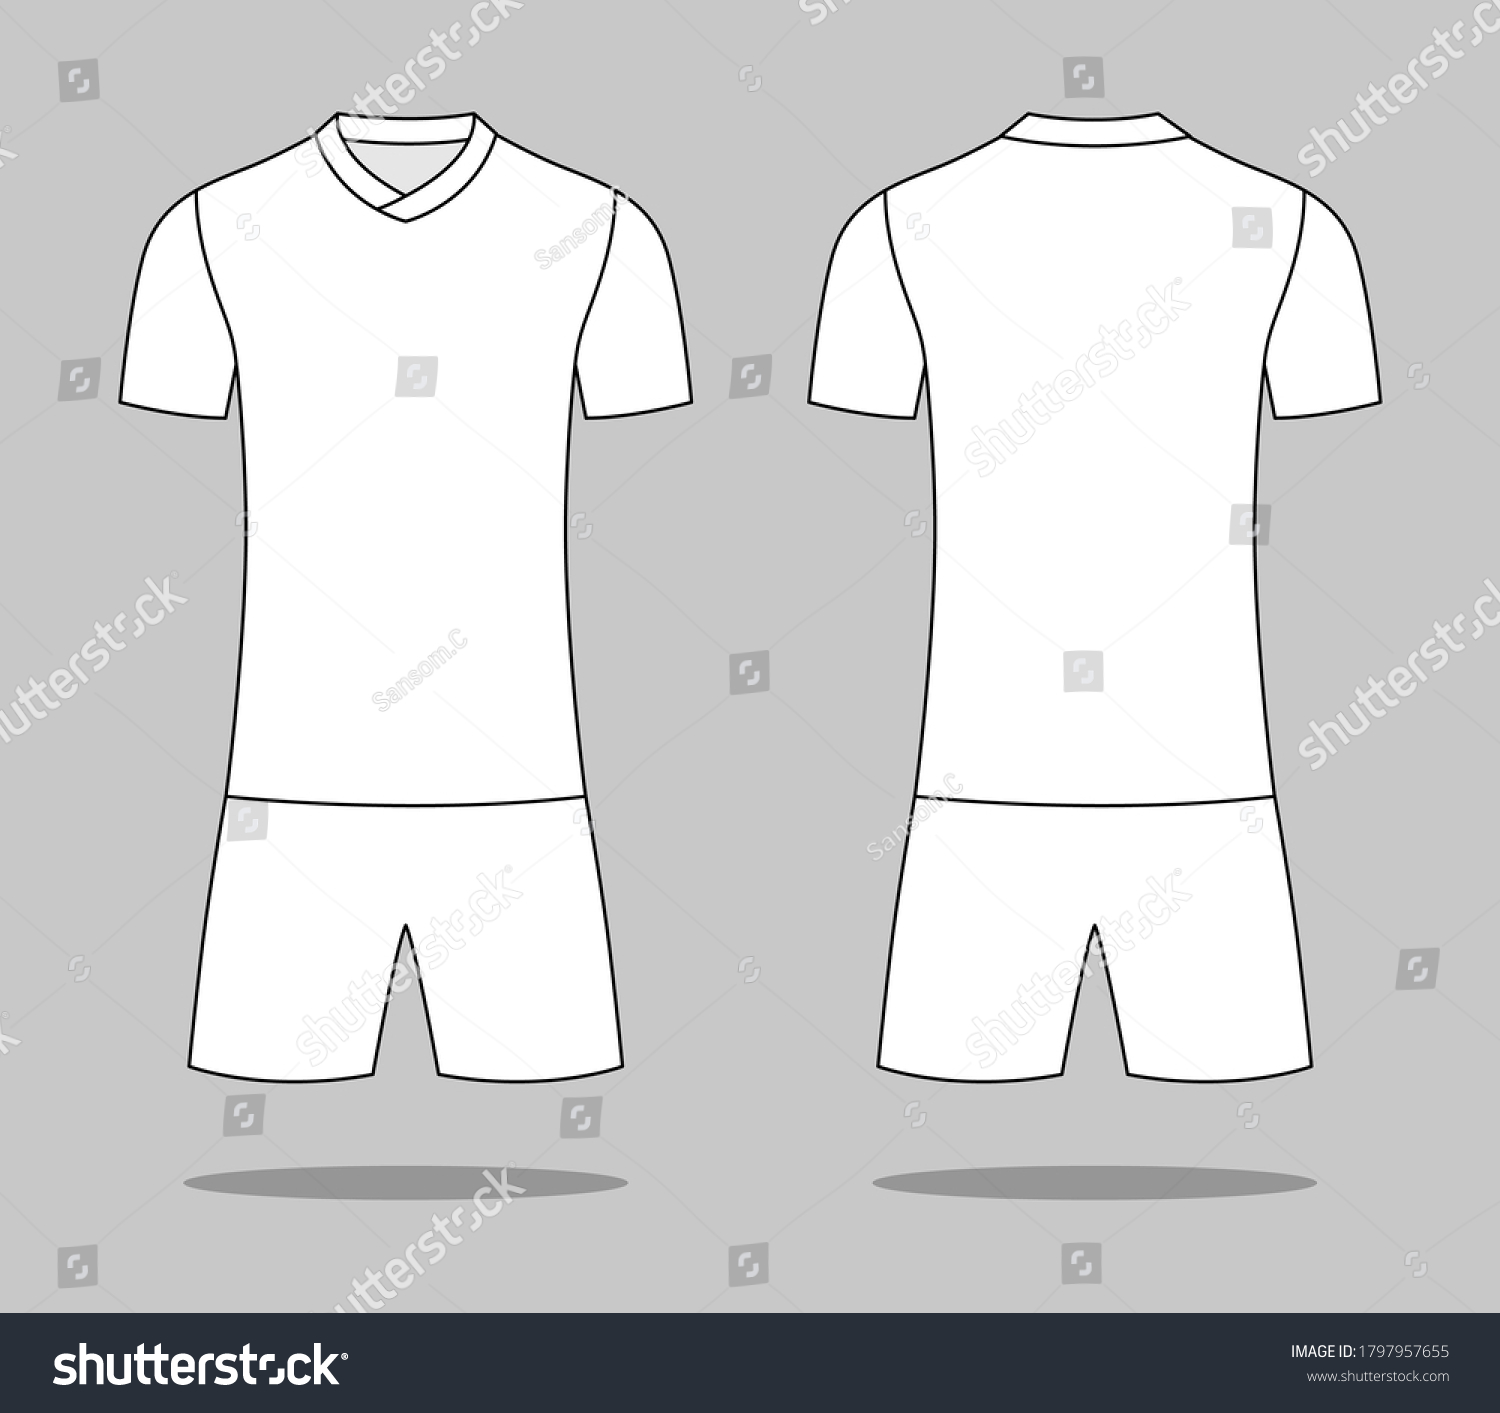 Blank White Soccer Shirt Template On Stock Vector (Royalty Free ...